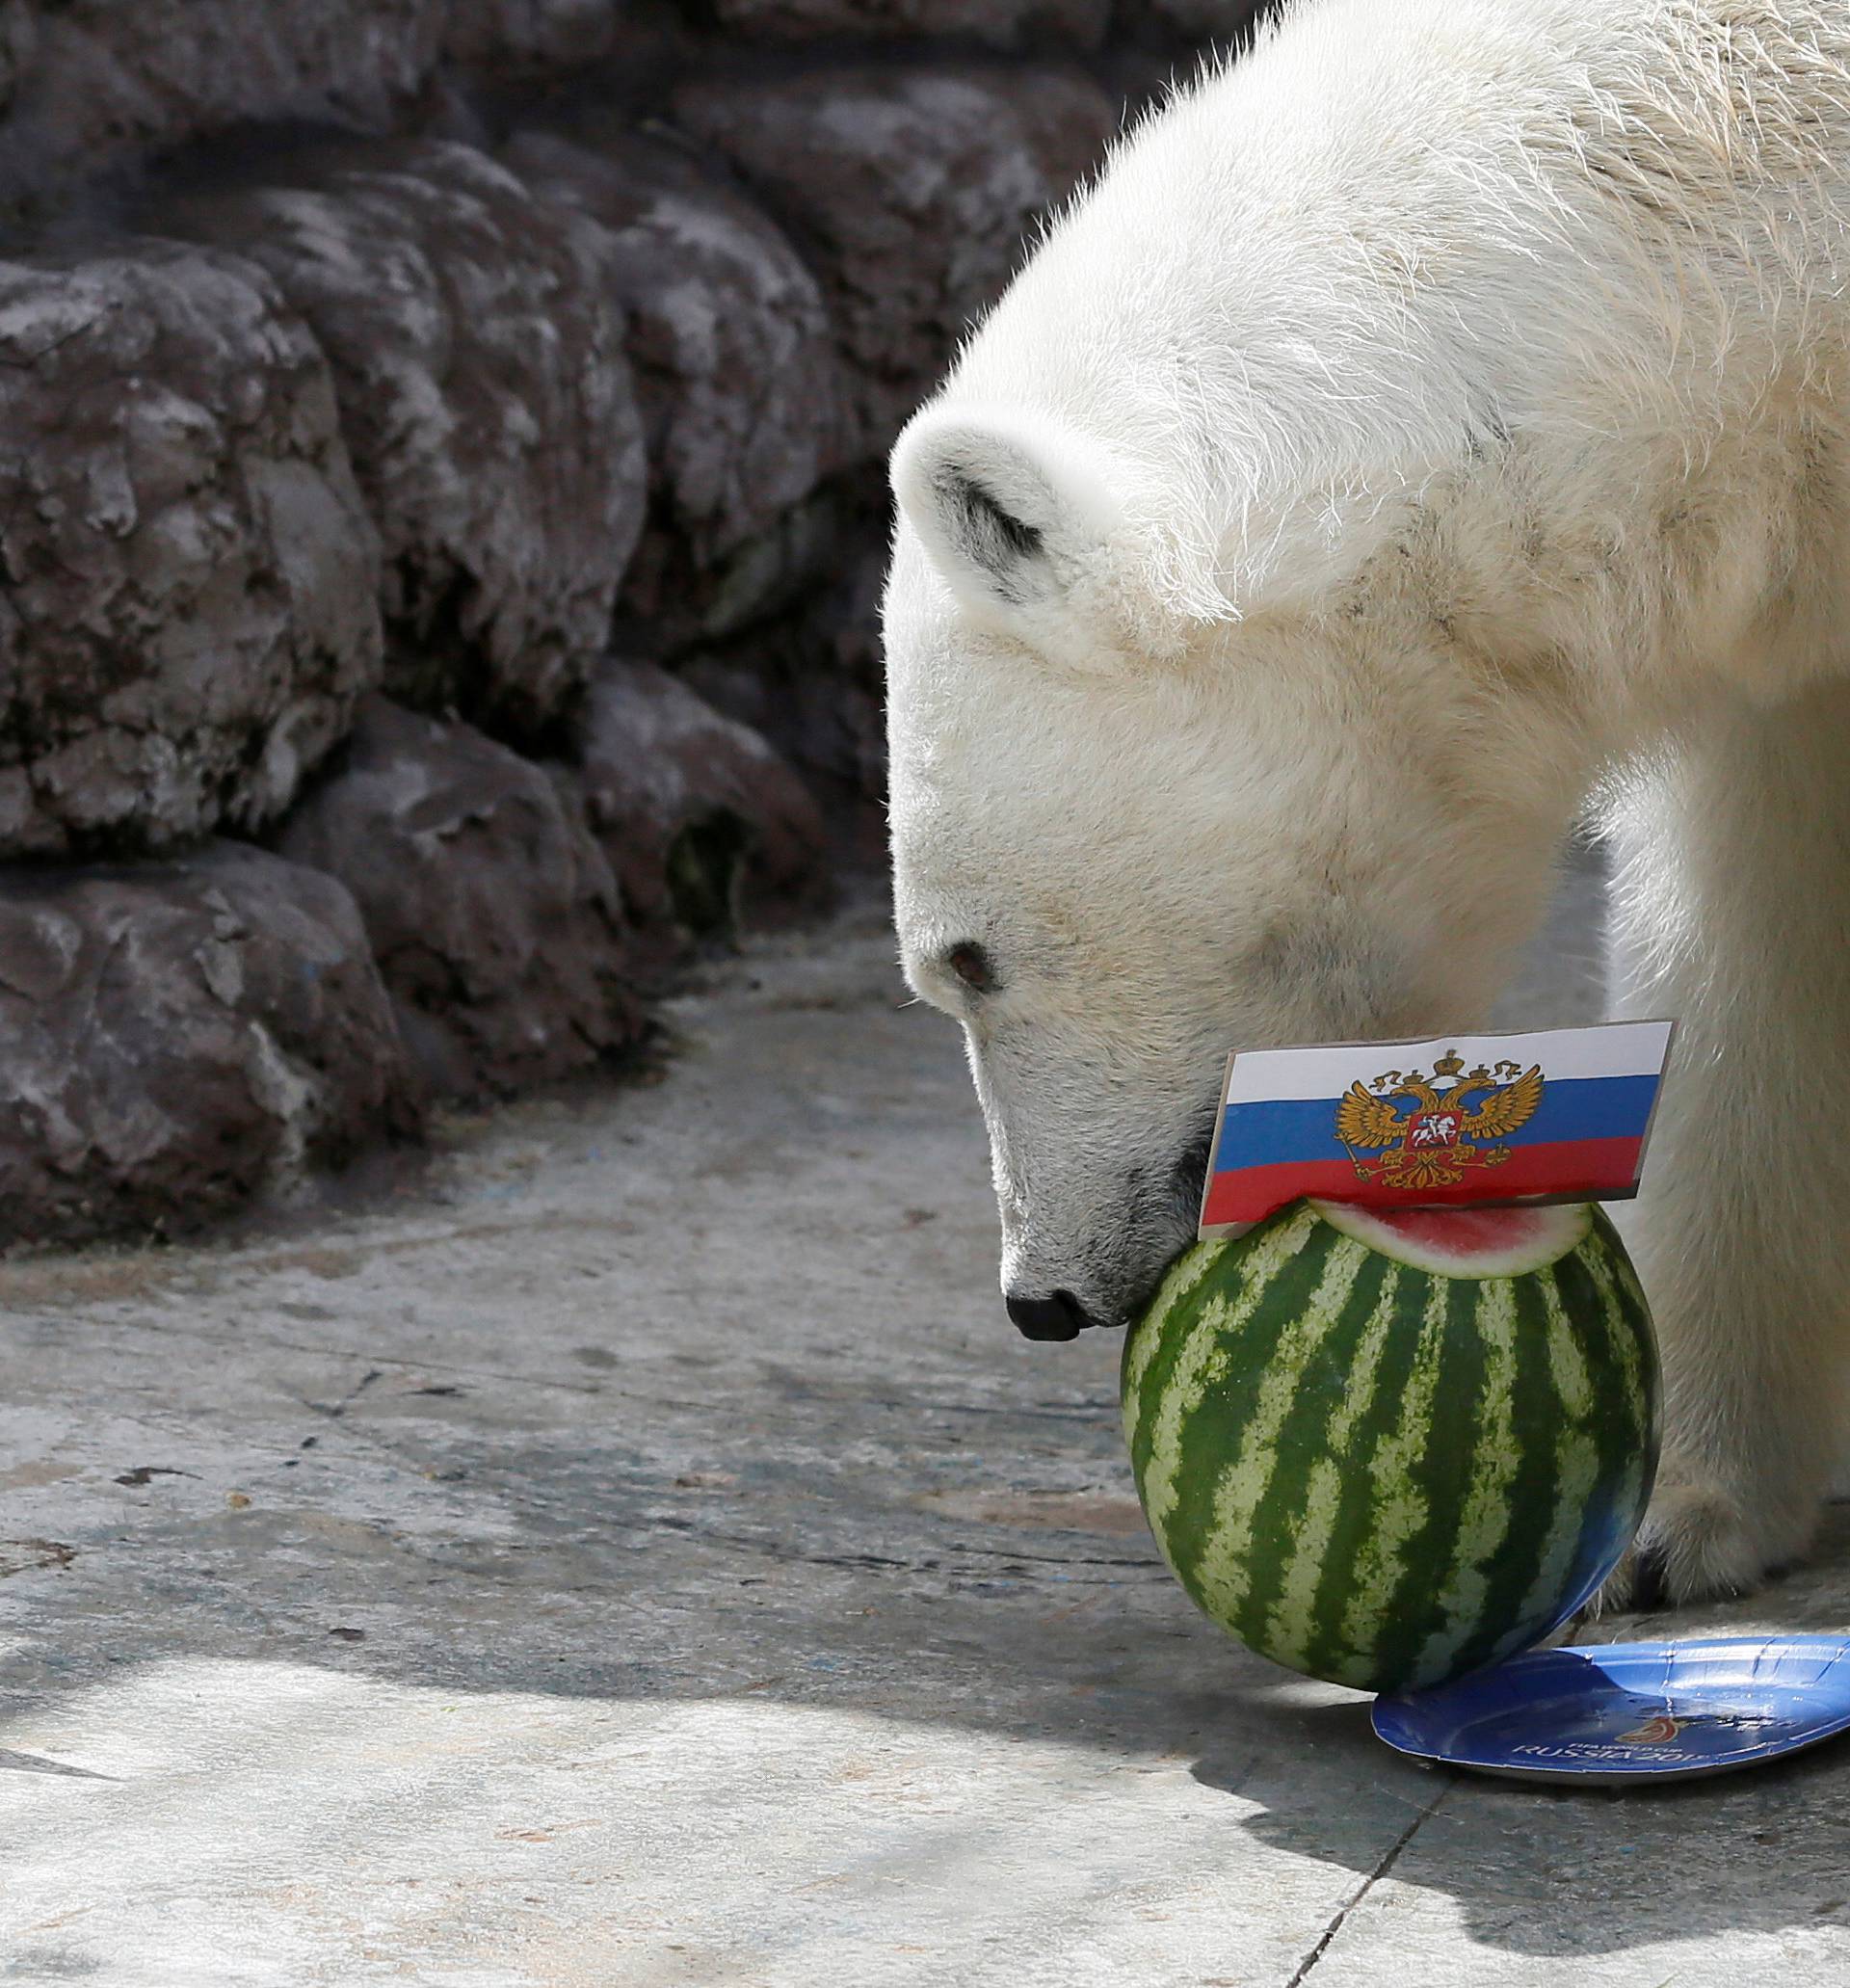 A polar bear attempts to predict the result of the soccer World Cup match between Croatia and Russia in Krasnoyarsk